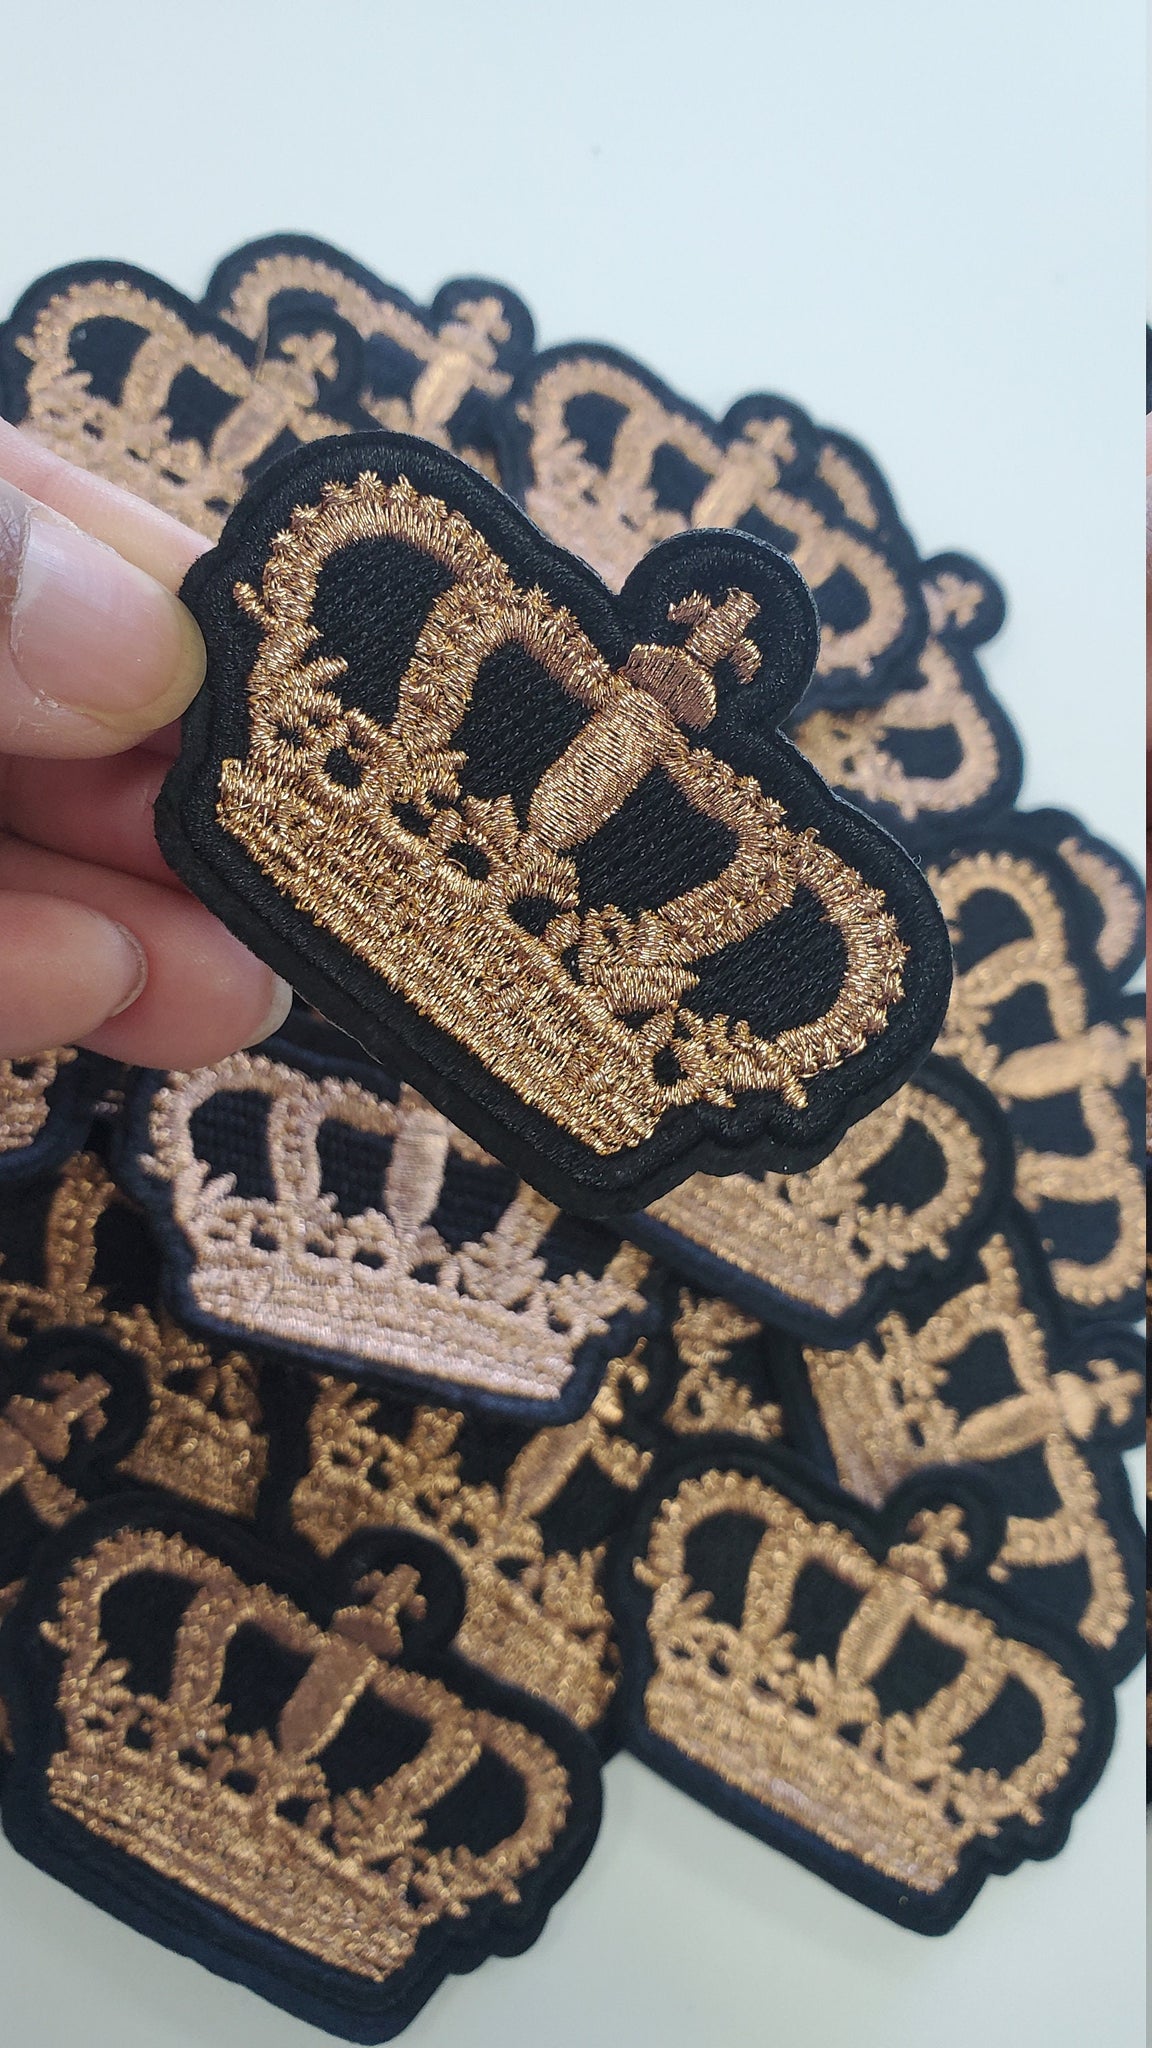 NEW, Small Copper & Black Royal Crown Patch , Cool Applique for Men, Iron-On Embroidery Patch, Cool Patch for Camo,Fashion Badge for Clothes